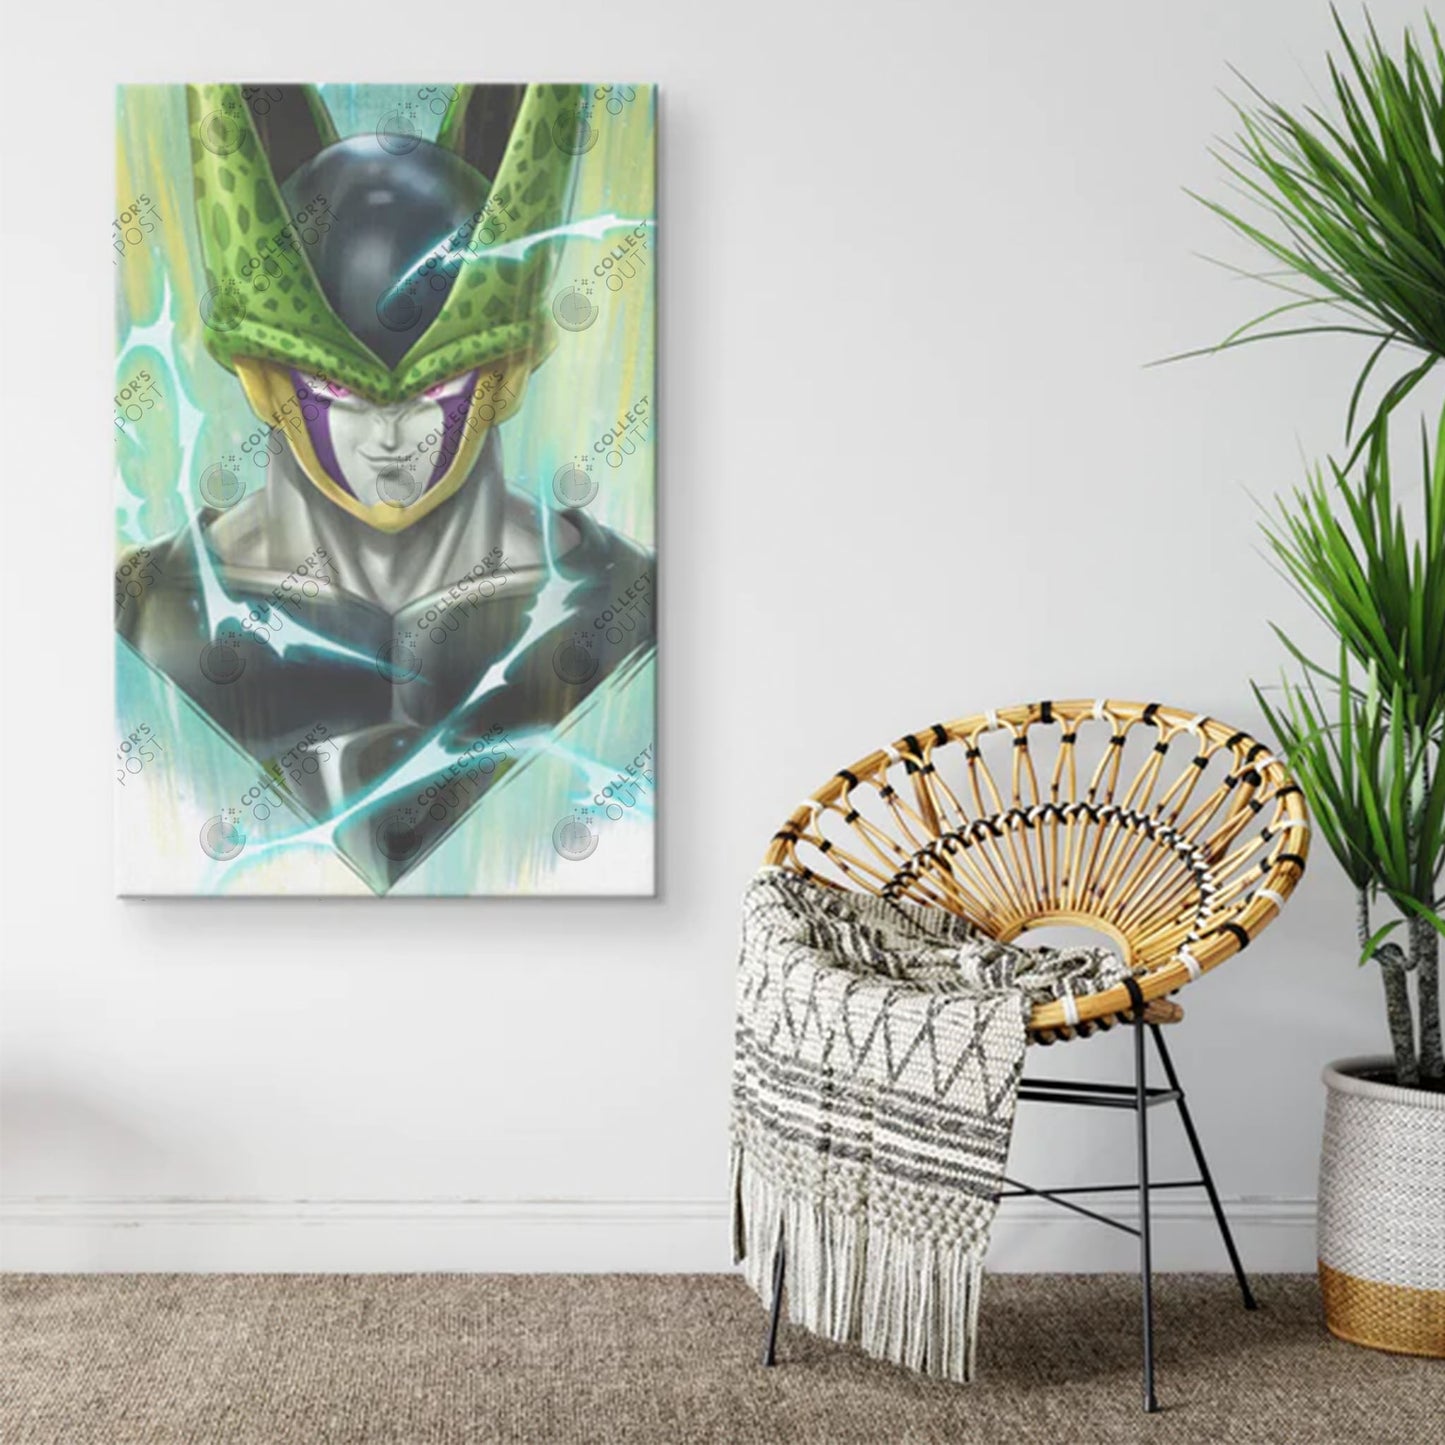 Cell "Stages of Perfection" (Dragon Ball Z) Legacy Portrait Art Print